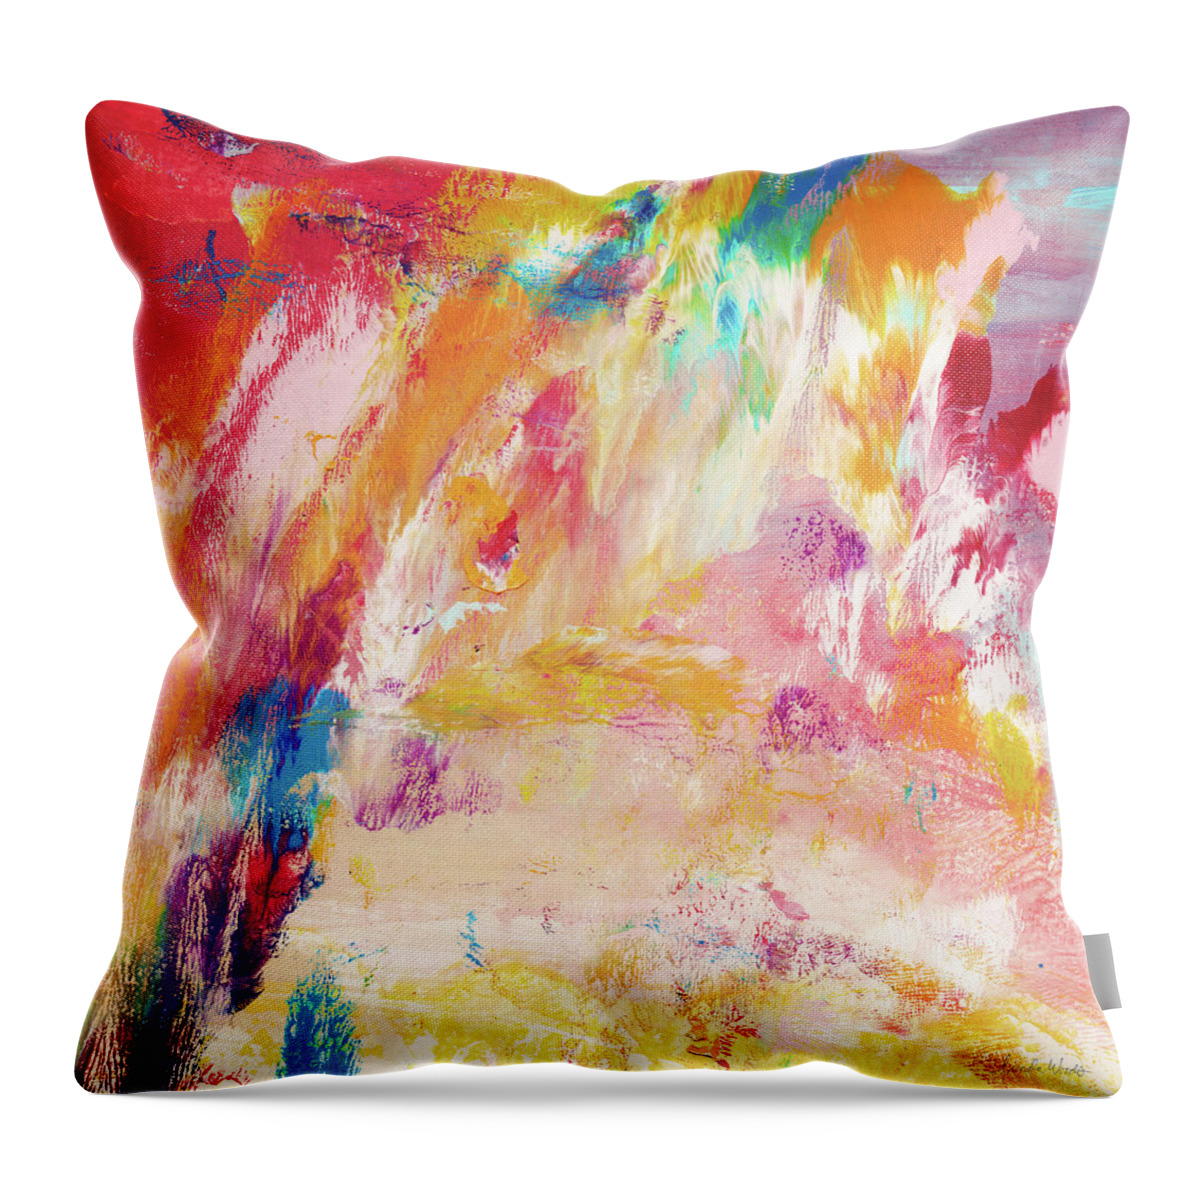 Abstract Painting Throw Pillow featuring the painting Happy Day- Abstract Art by Linda Woods by Linda Woods